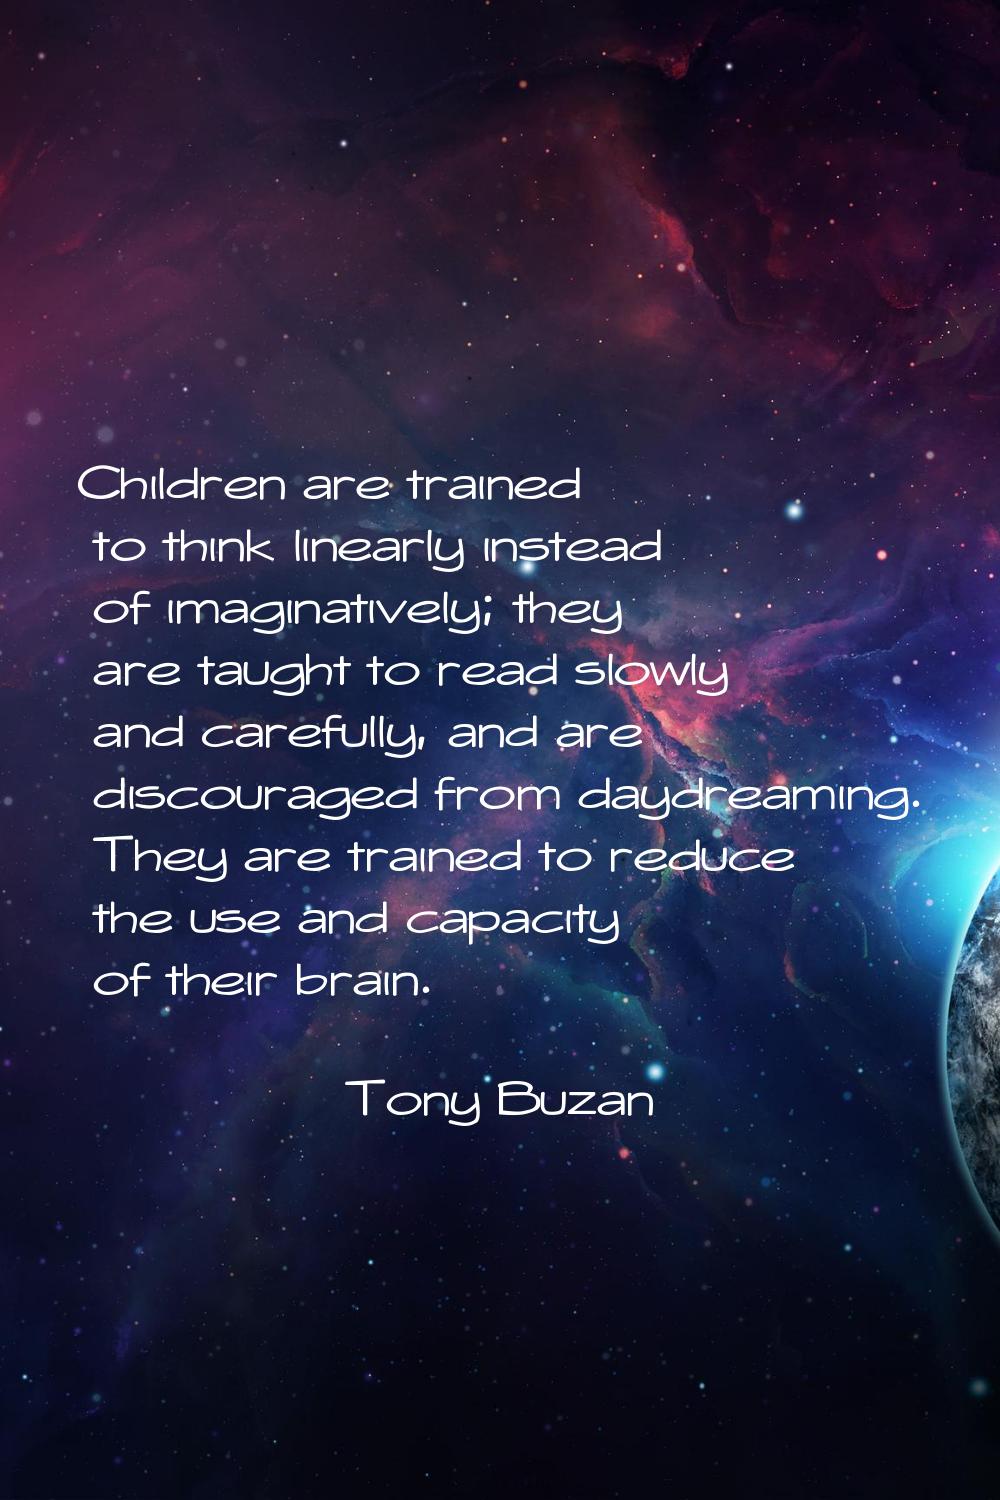 Children are trained to think linearly instead of imaginatively; they are taught to read slowly and